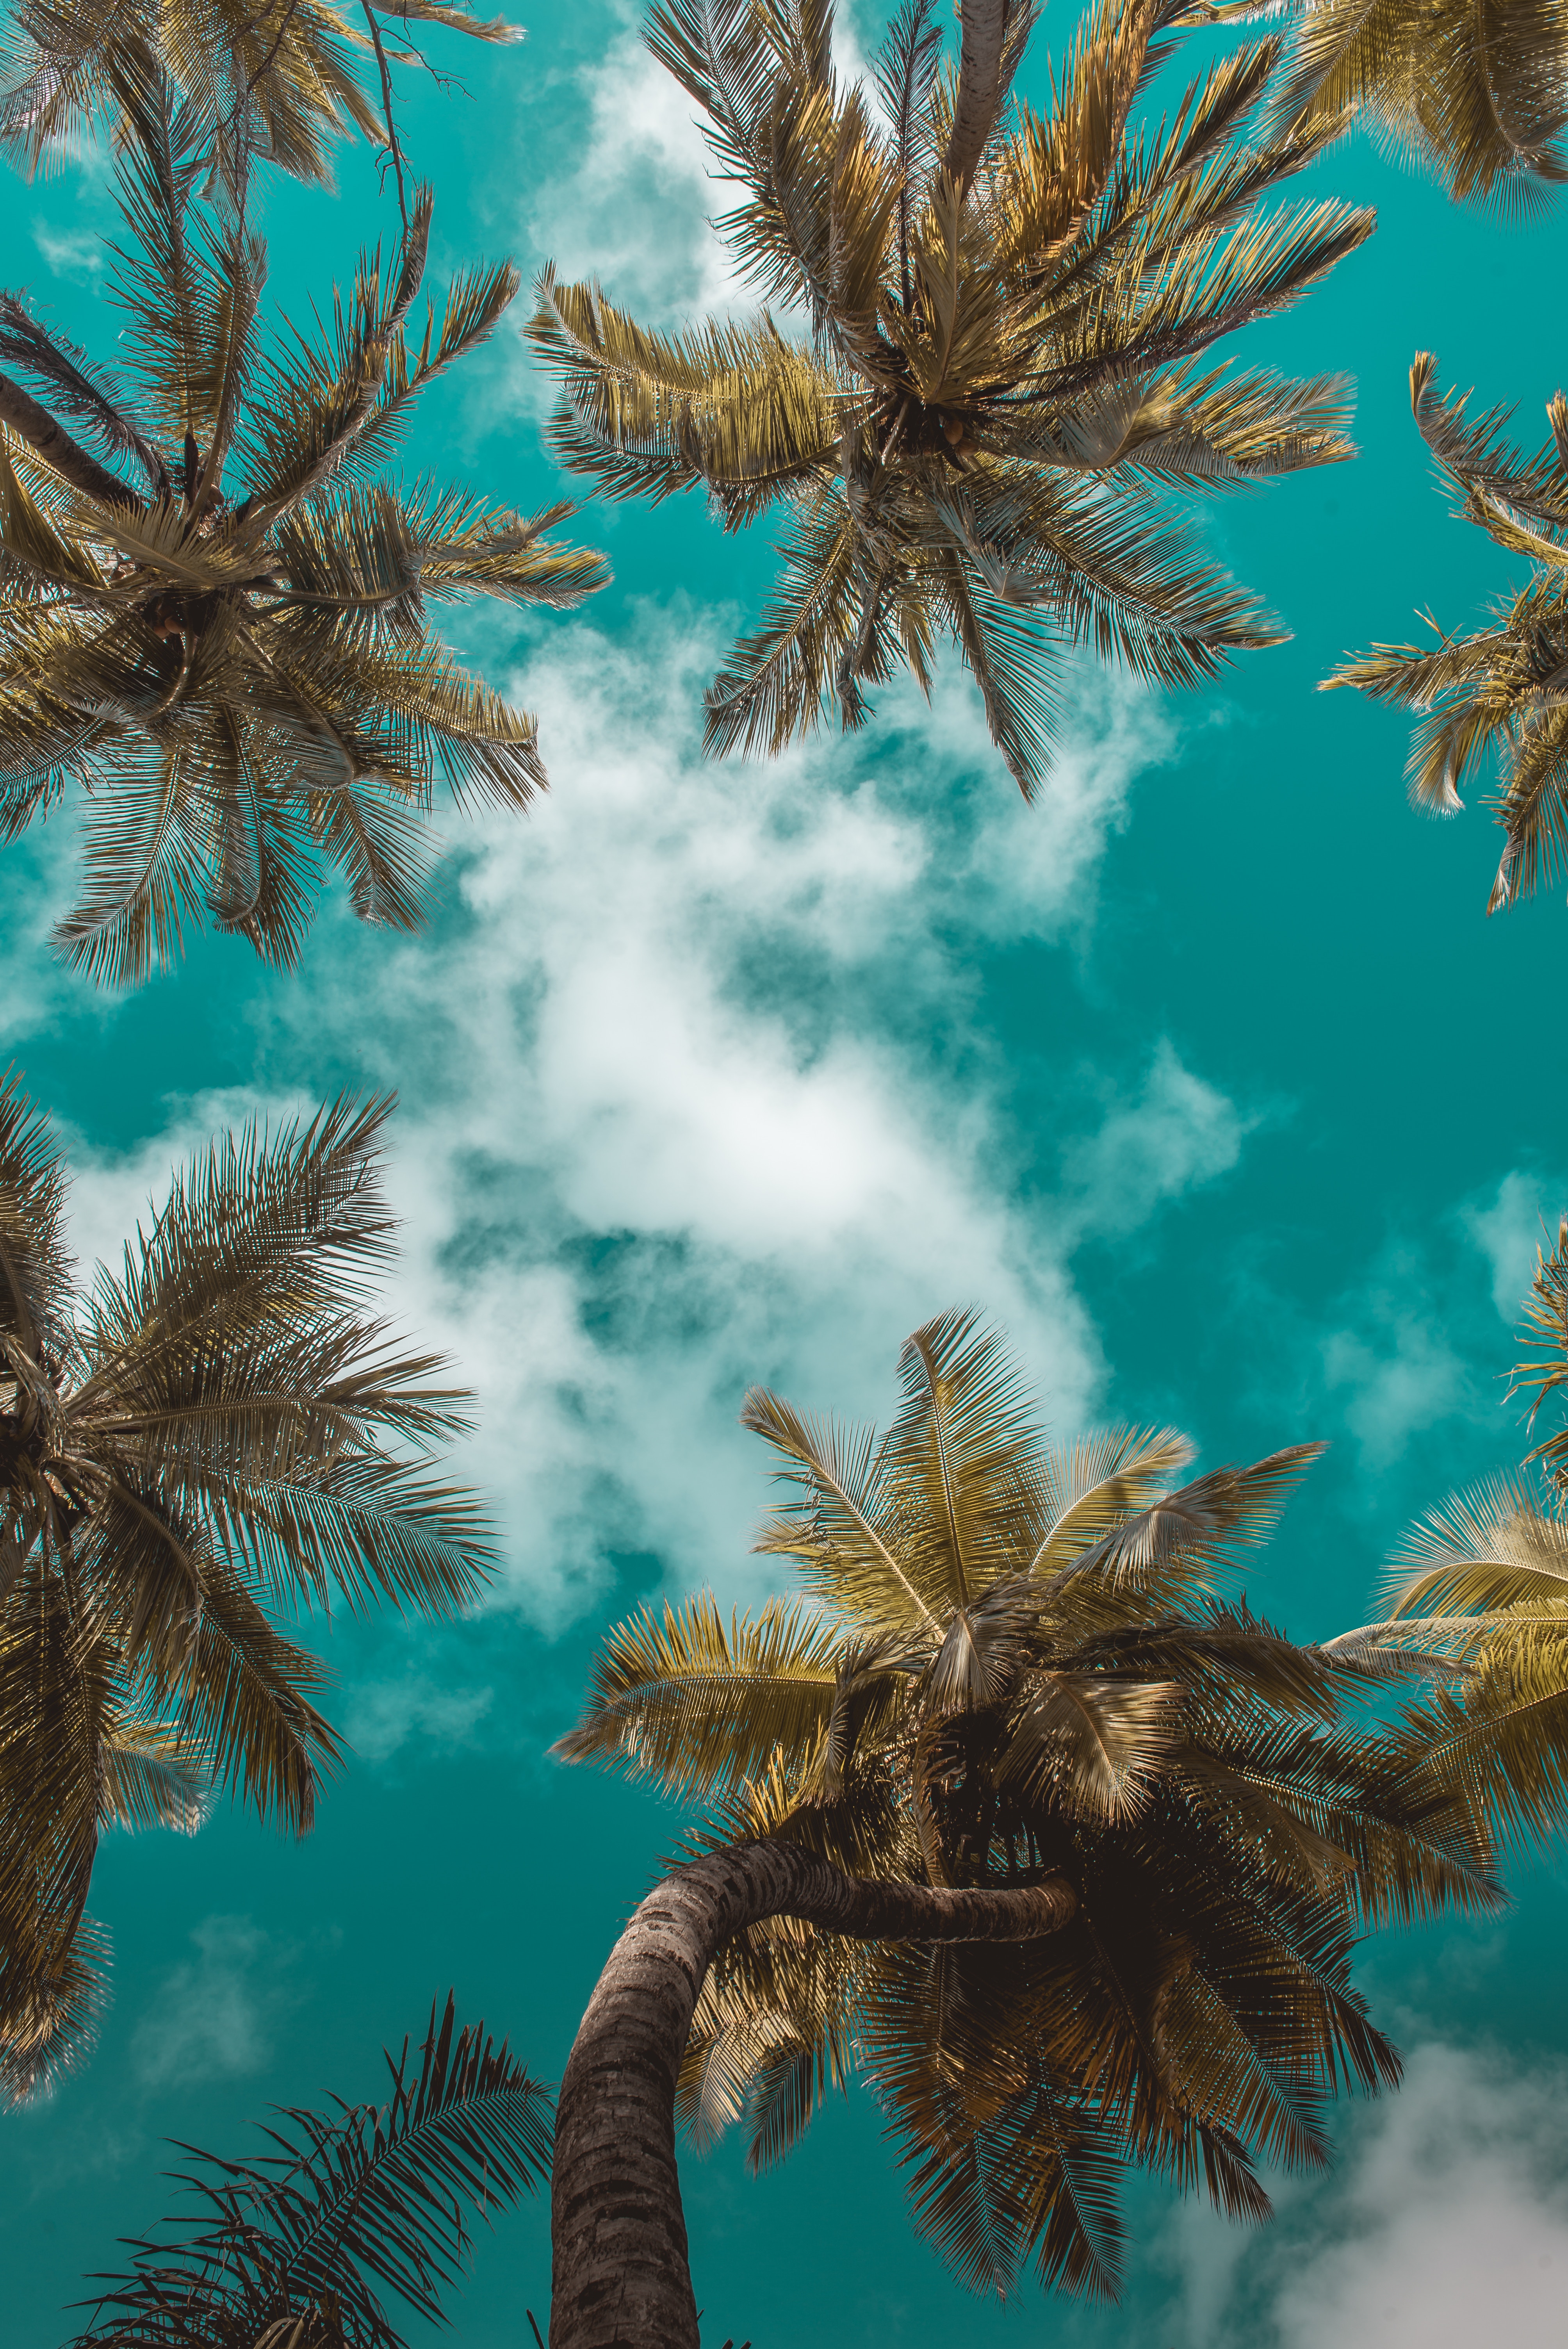 leaves, palms, nature, branches, sky, clouds, tropics, bottom view Full HD